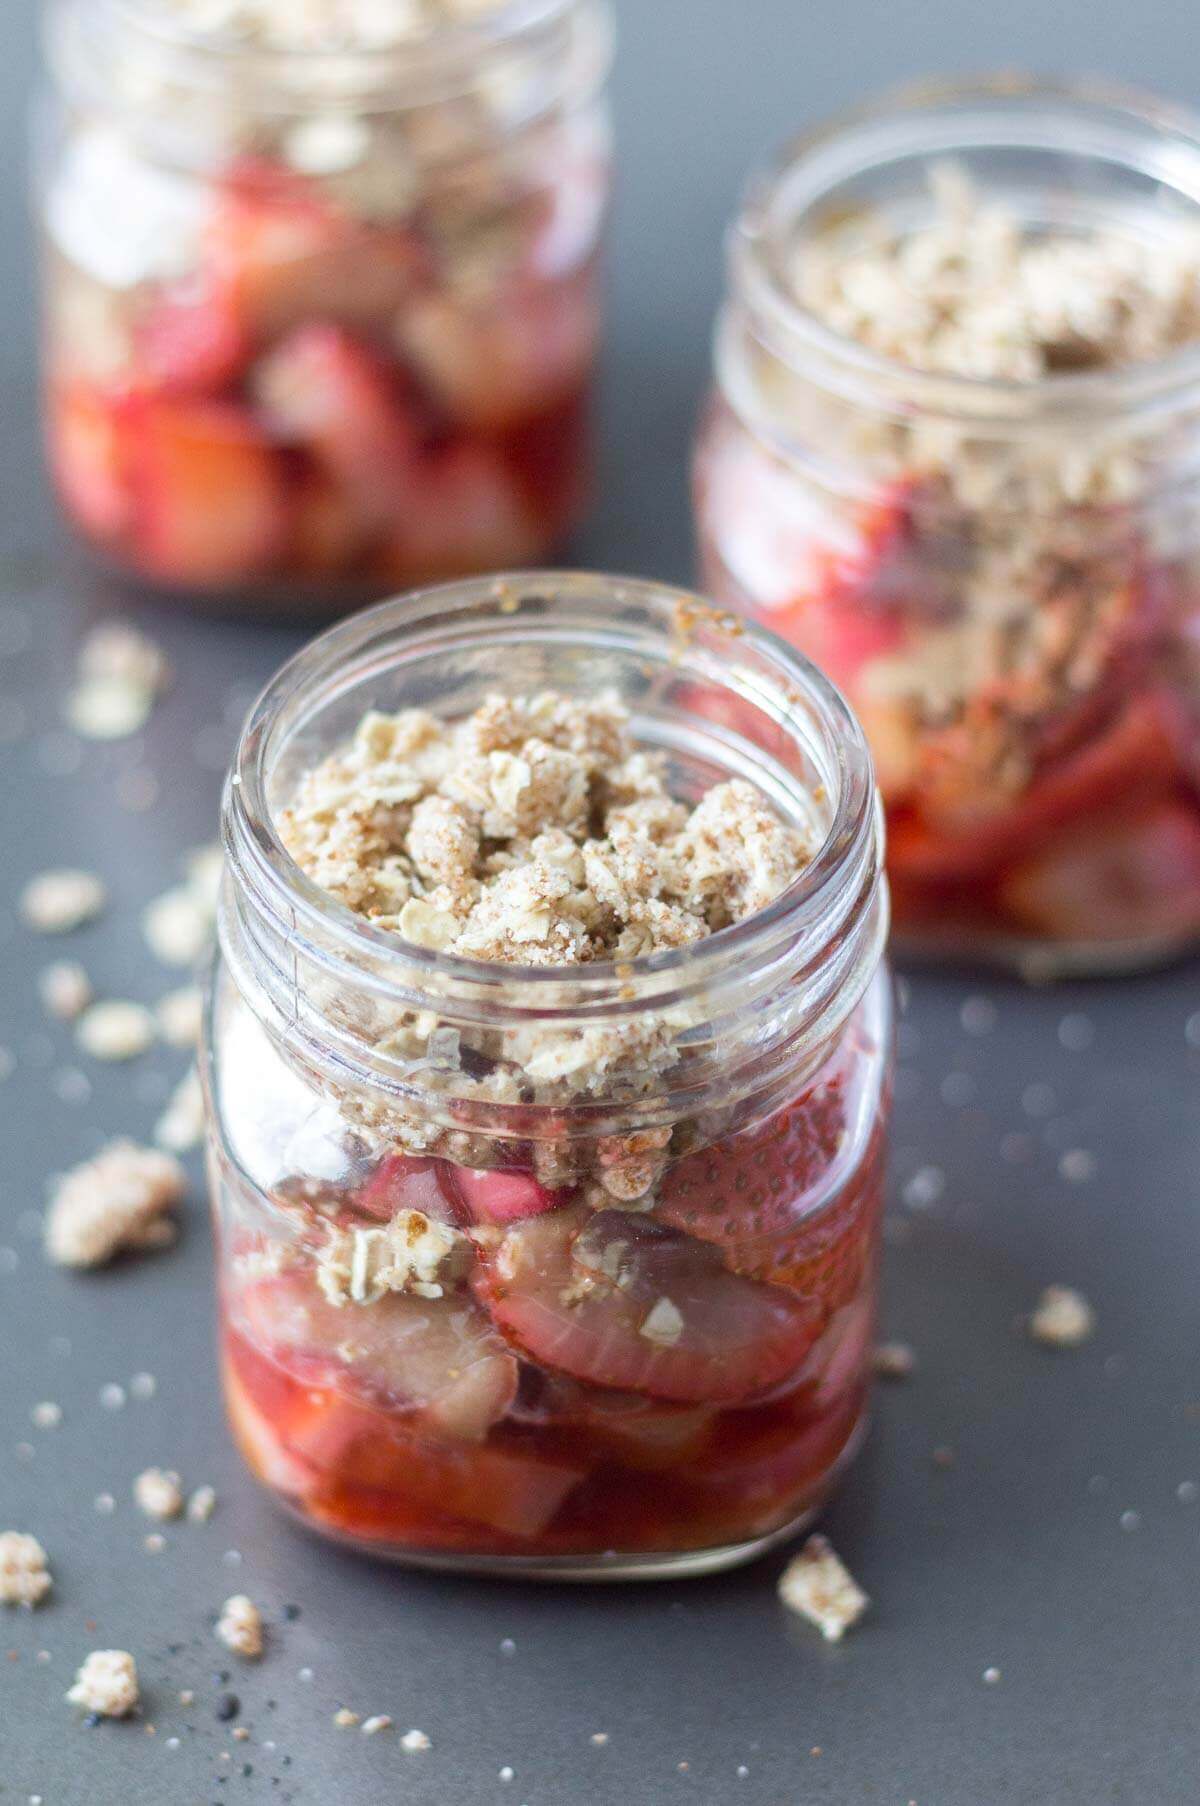 You will love this strawberry rhubarb crisp for all it's summertime flavor, but you will also love that it's vegan and gluten free and has no refined sugar!